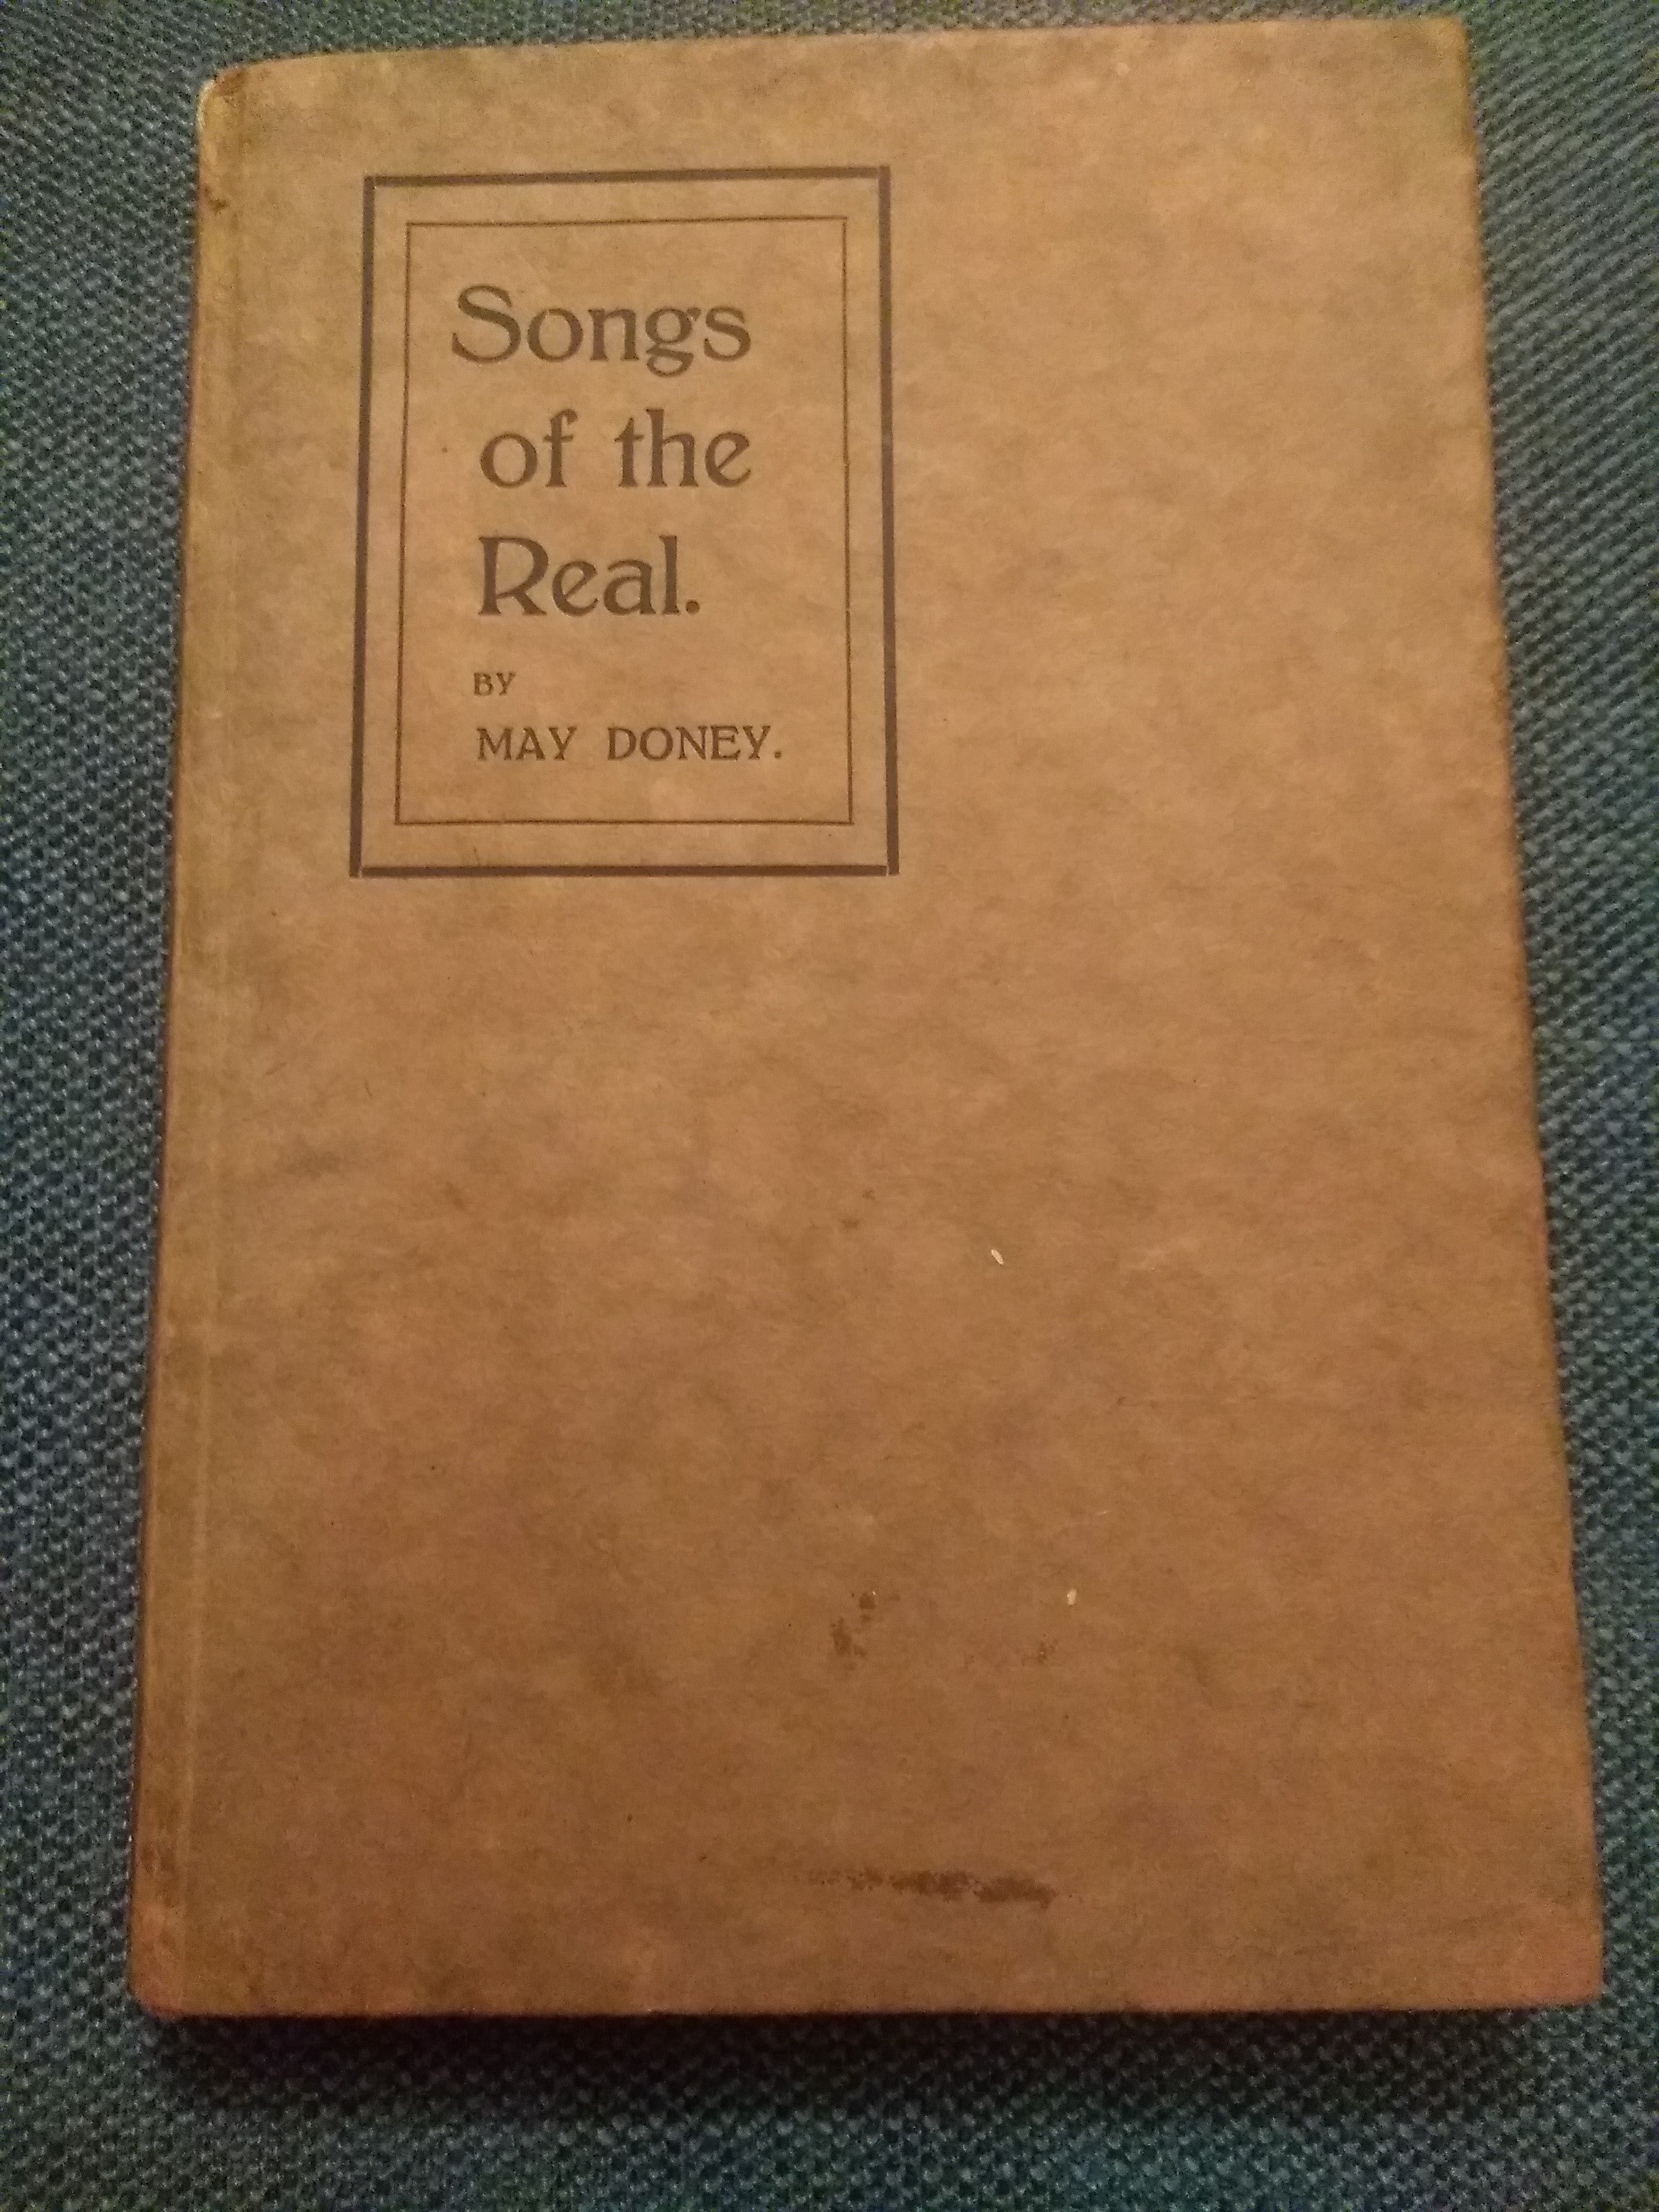 Songs of the Real, by May Doney